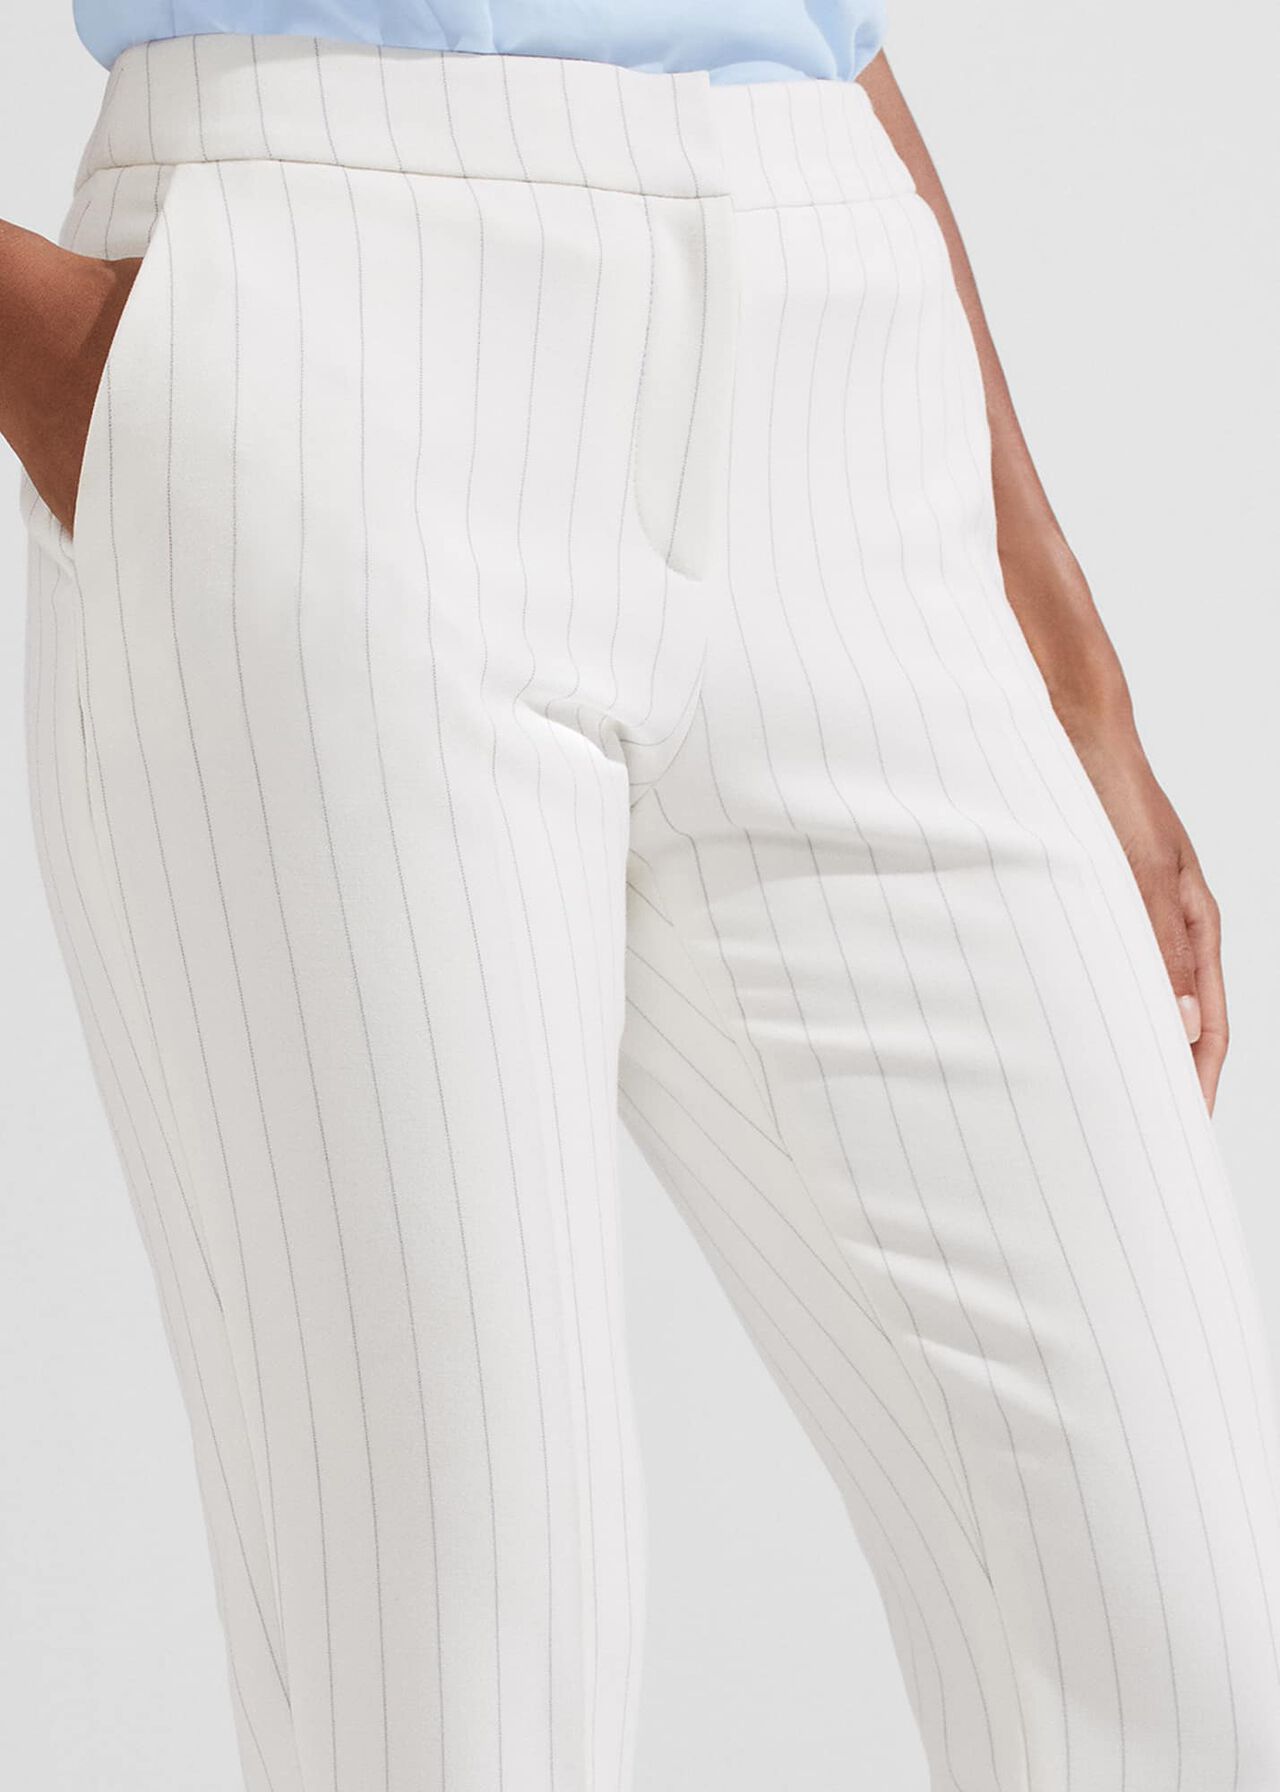 Sherry Trousers, Ivory Grey, hi-res